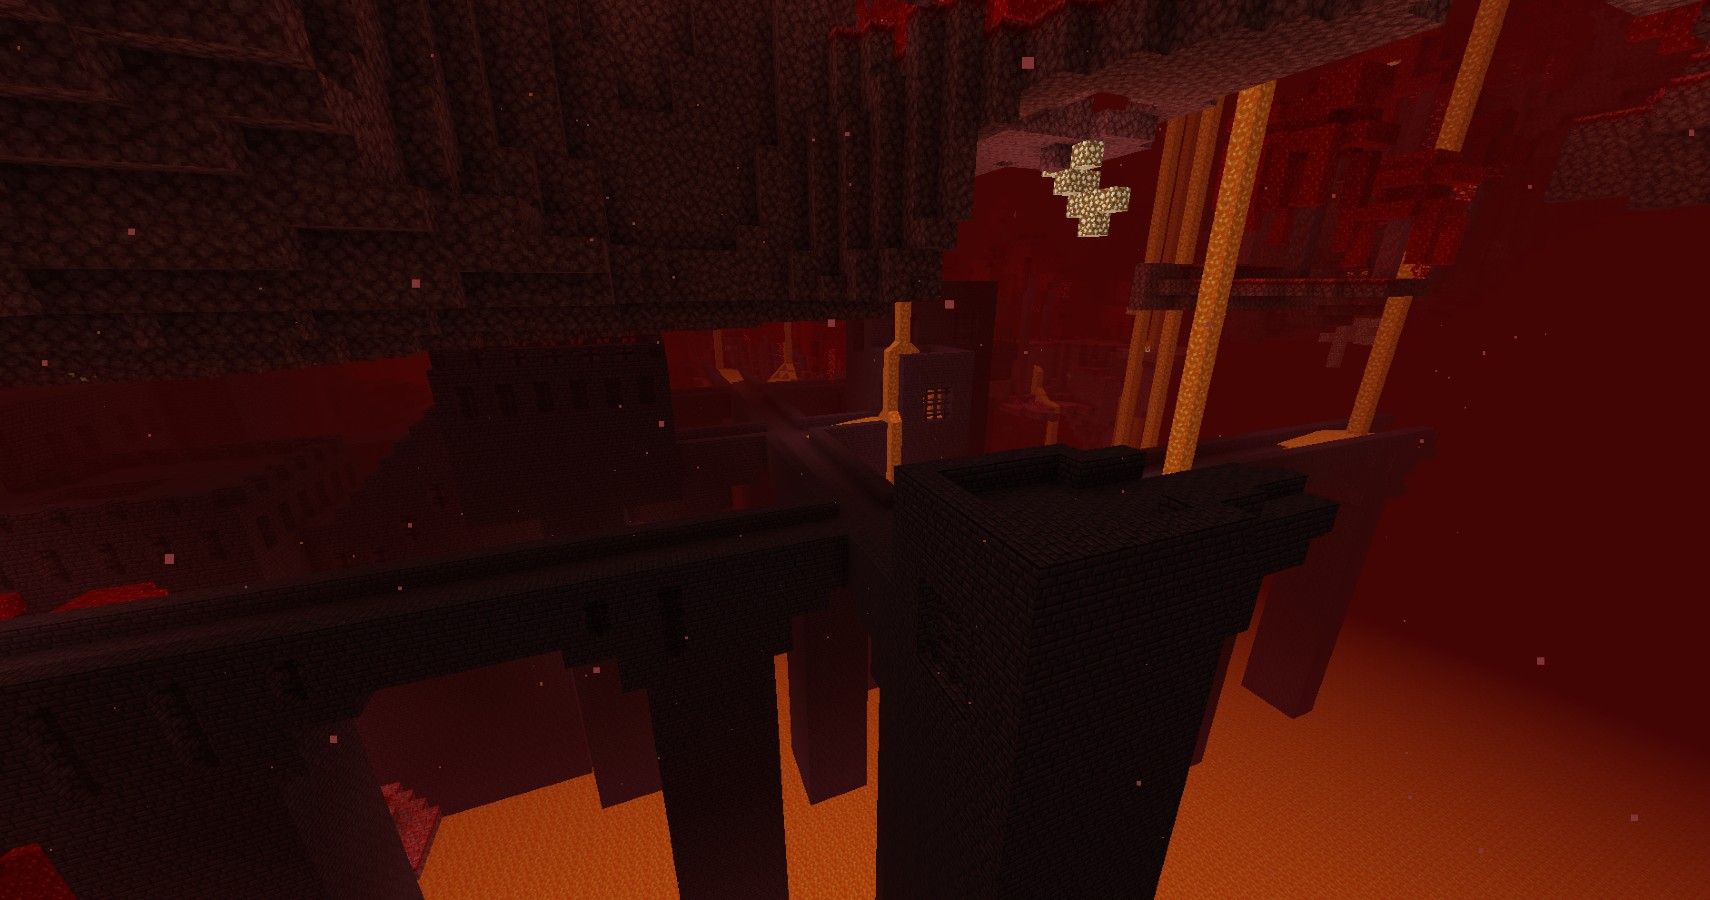 Nether Fortress from Minecraft